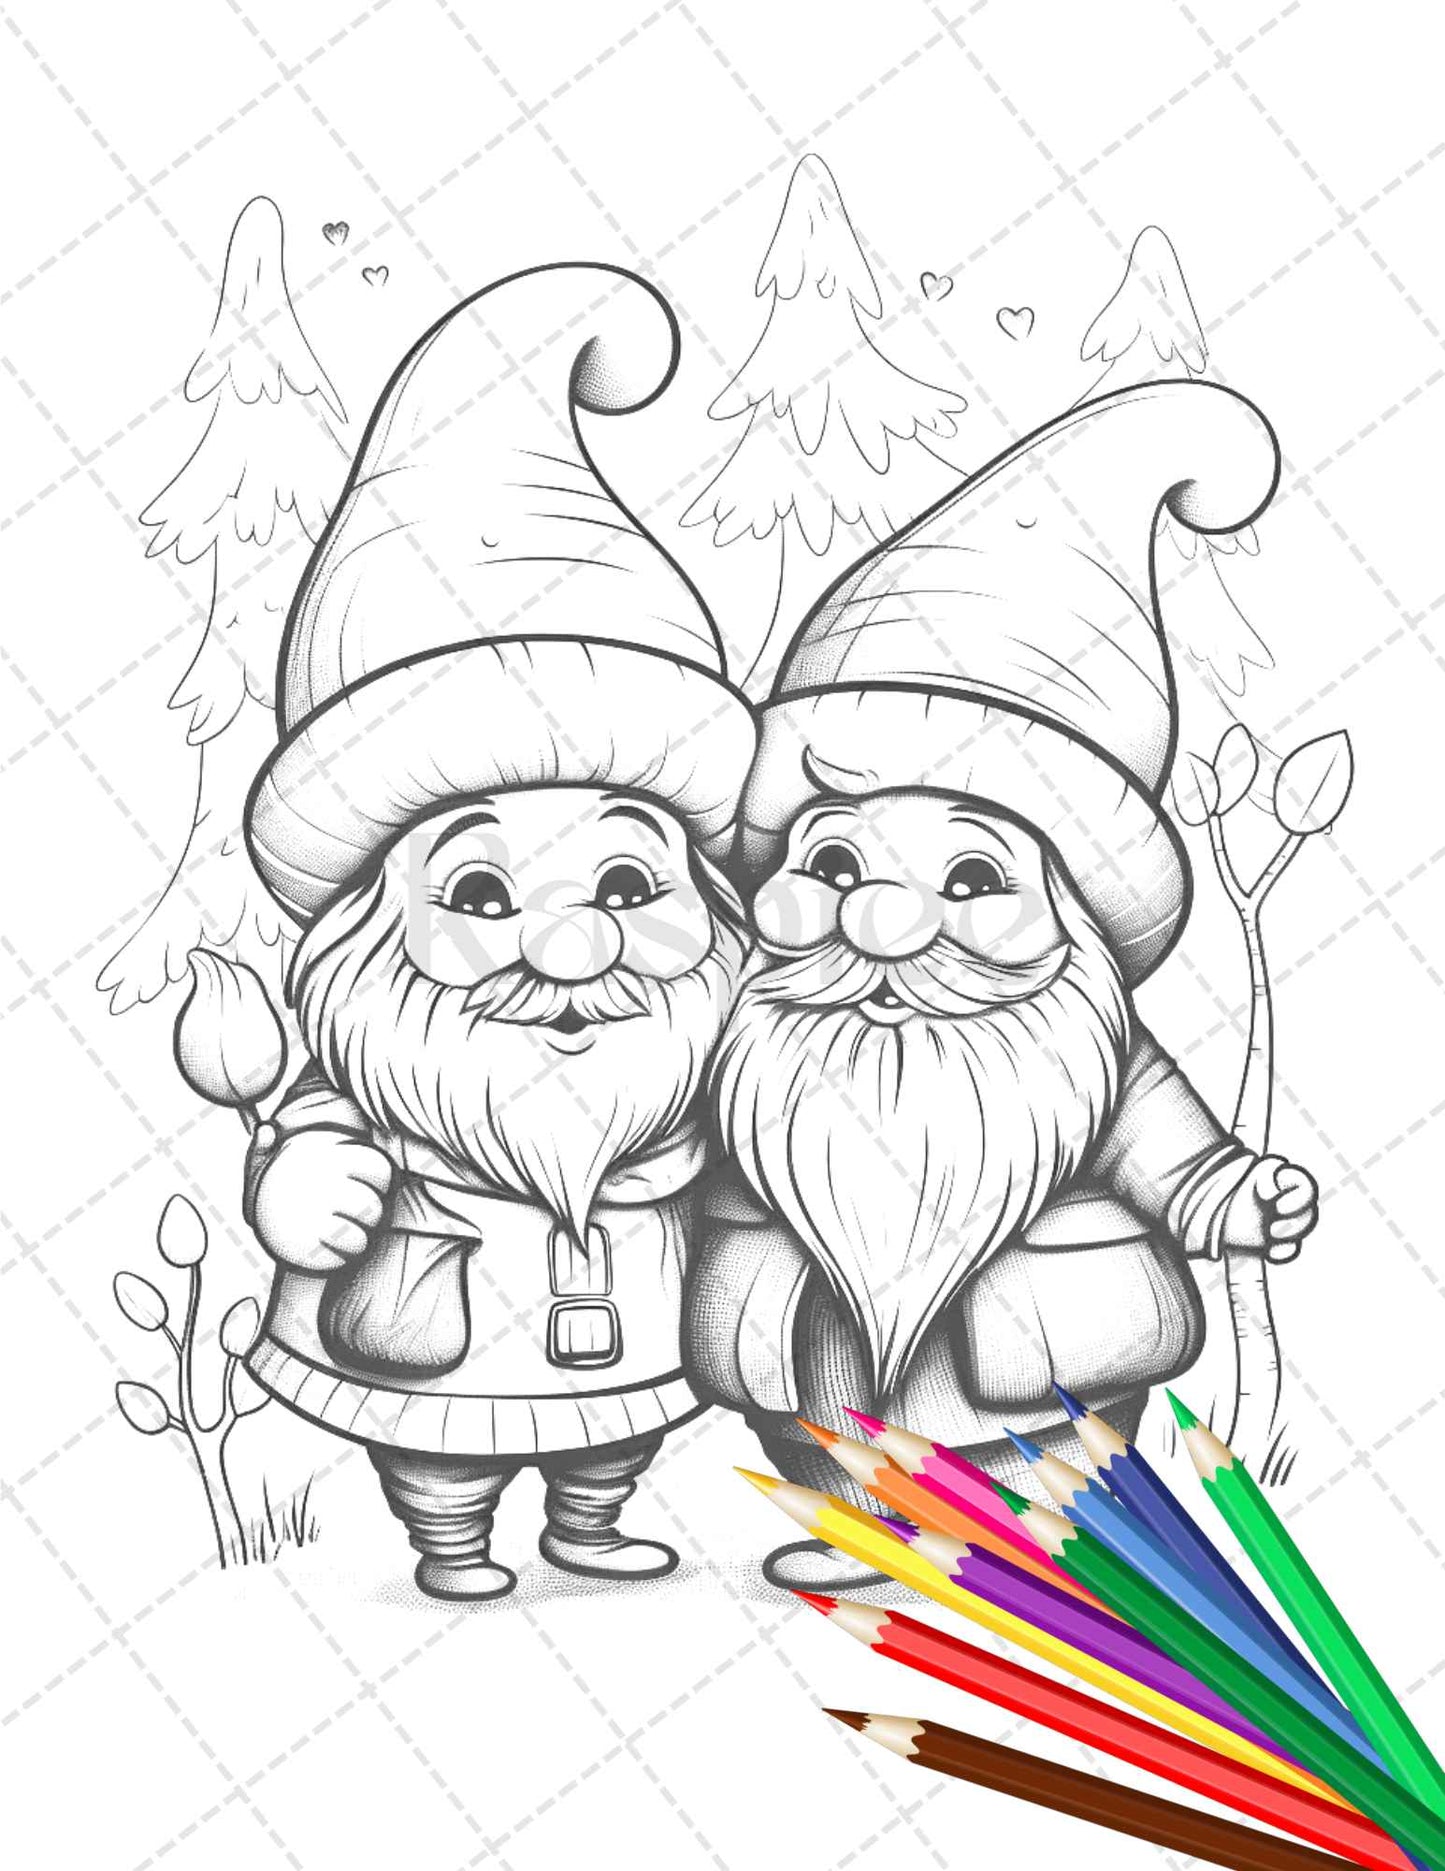 33 Gnome Love Coloring Pages Printable for Adults, Grayscale Coloring Page, PDF File Instant Download - raspiee